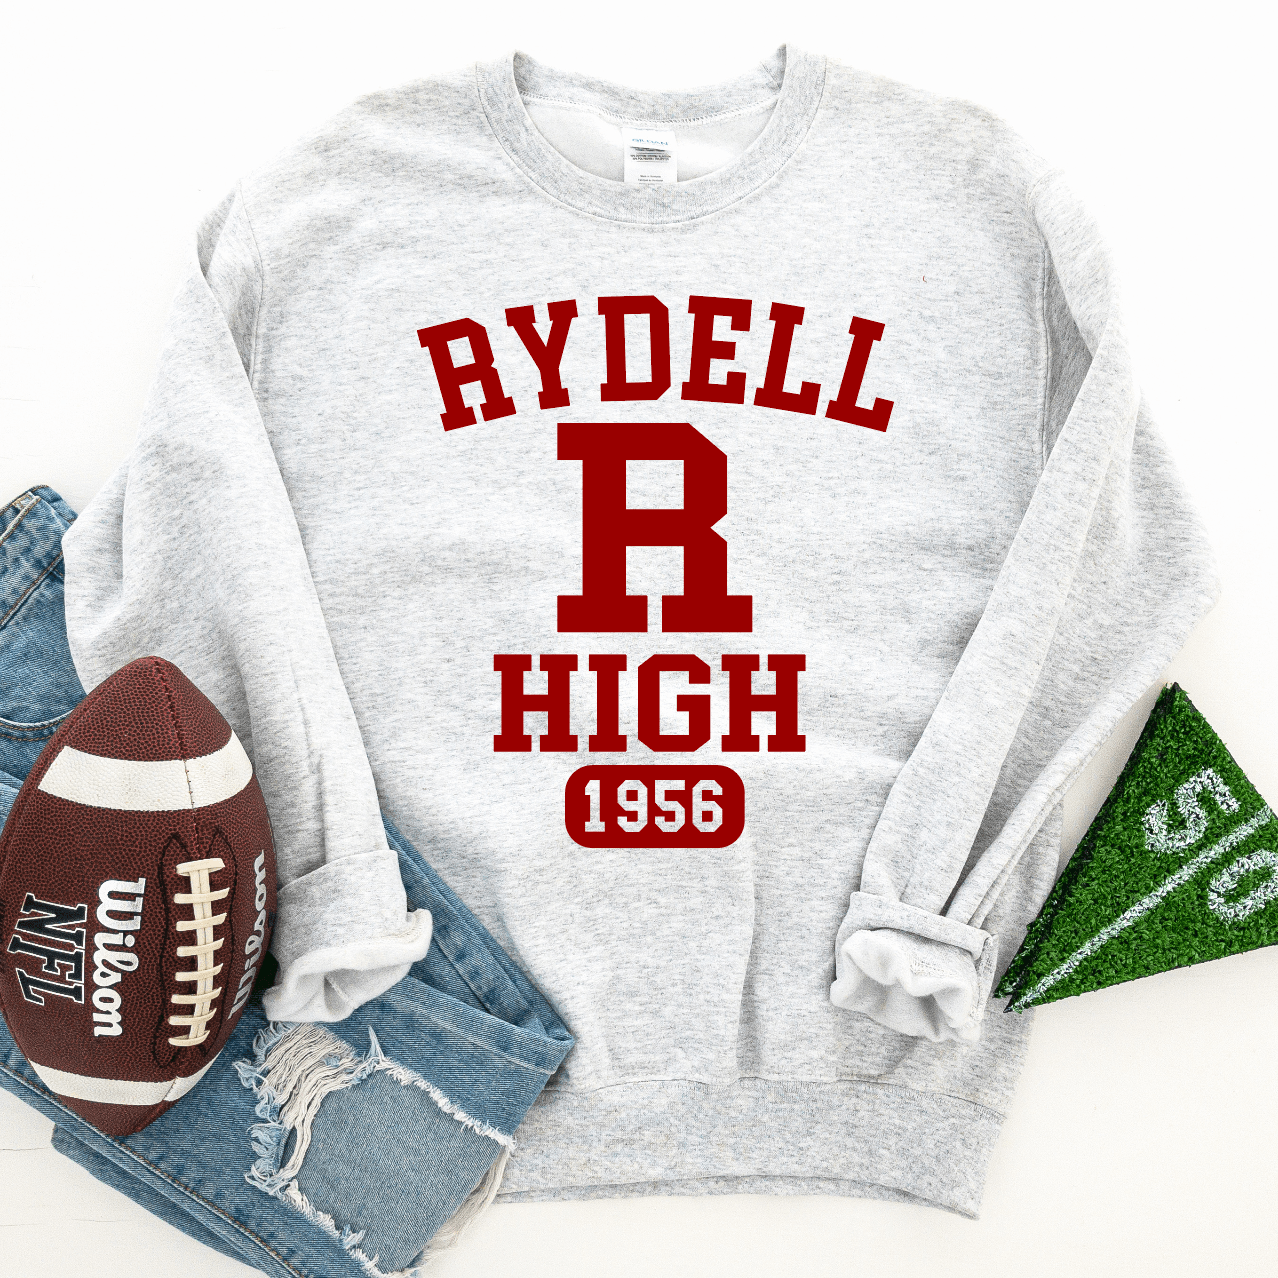 Rydell High - Signastyle Boutique